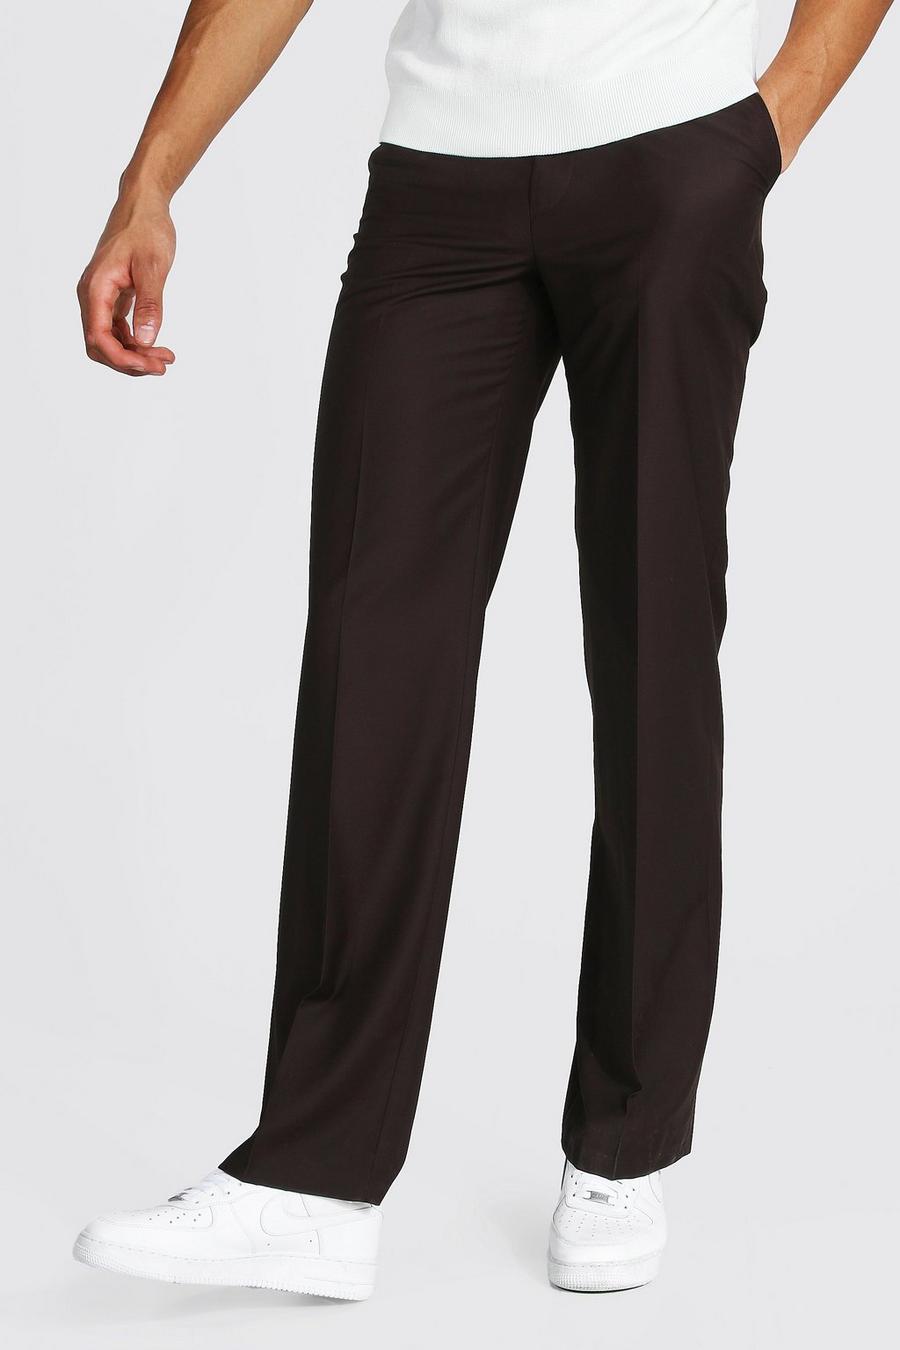 Brown Tall Straight Leg Trouser image number 1